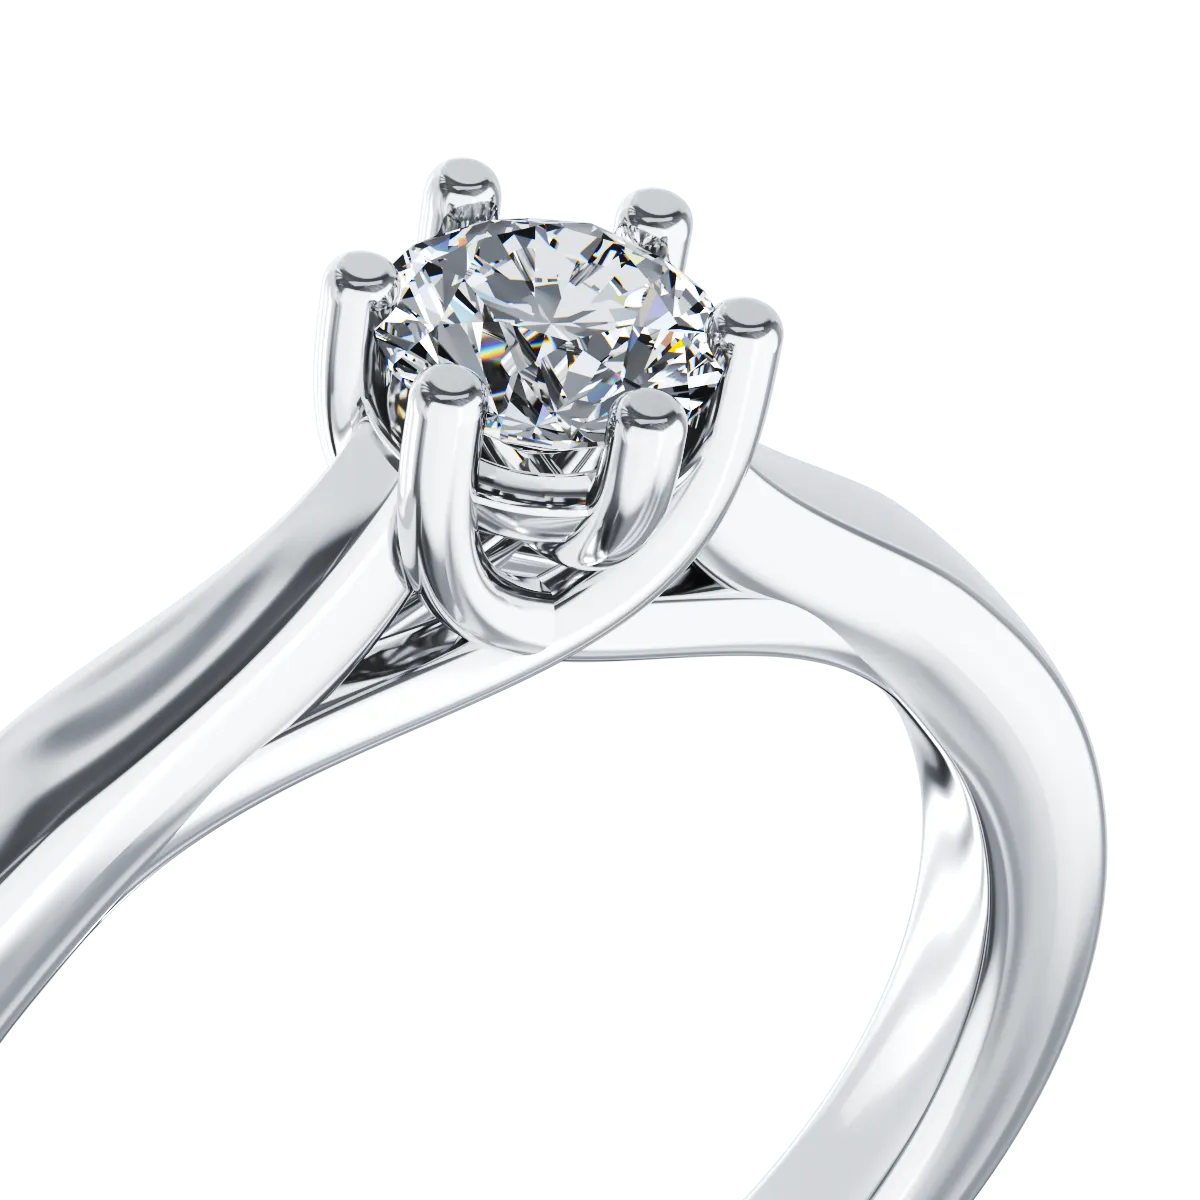 18K white gold engagement ring with solitaire diamond of 0.24ct